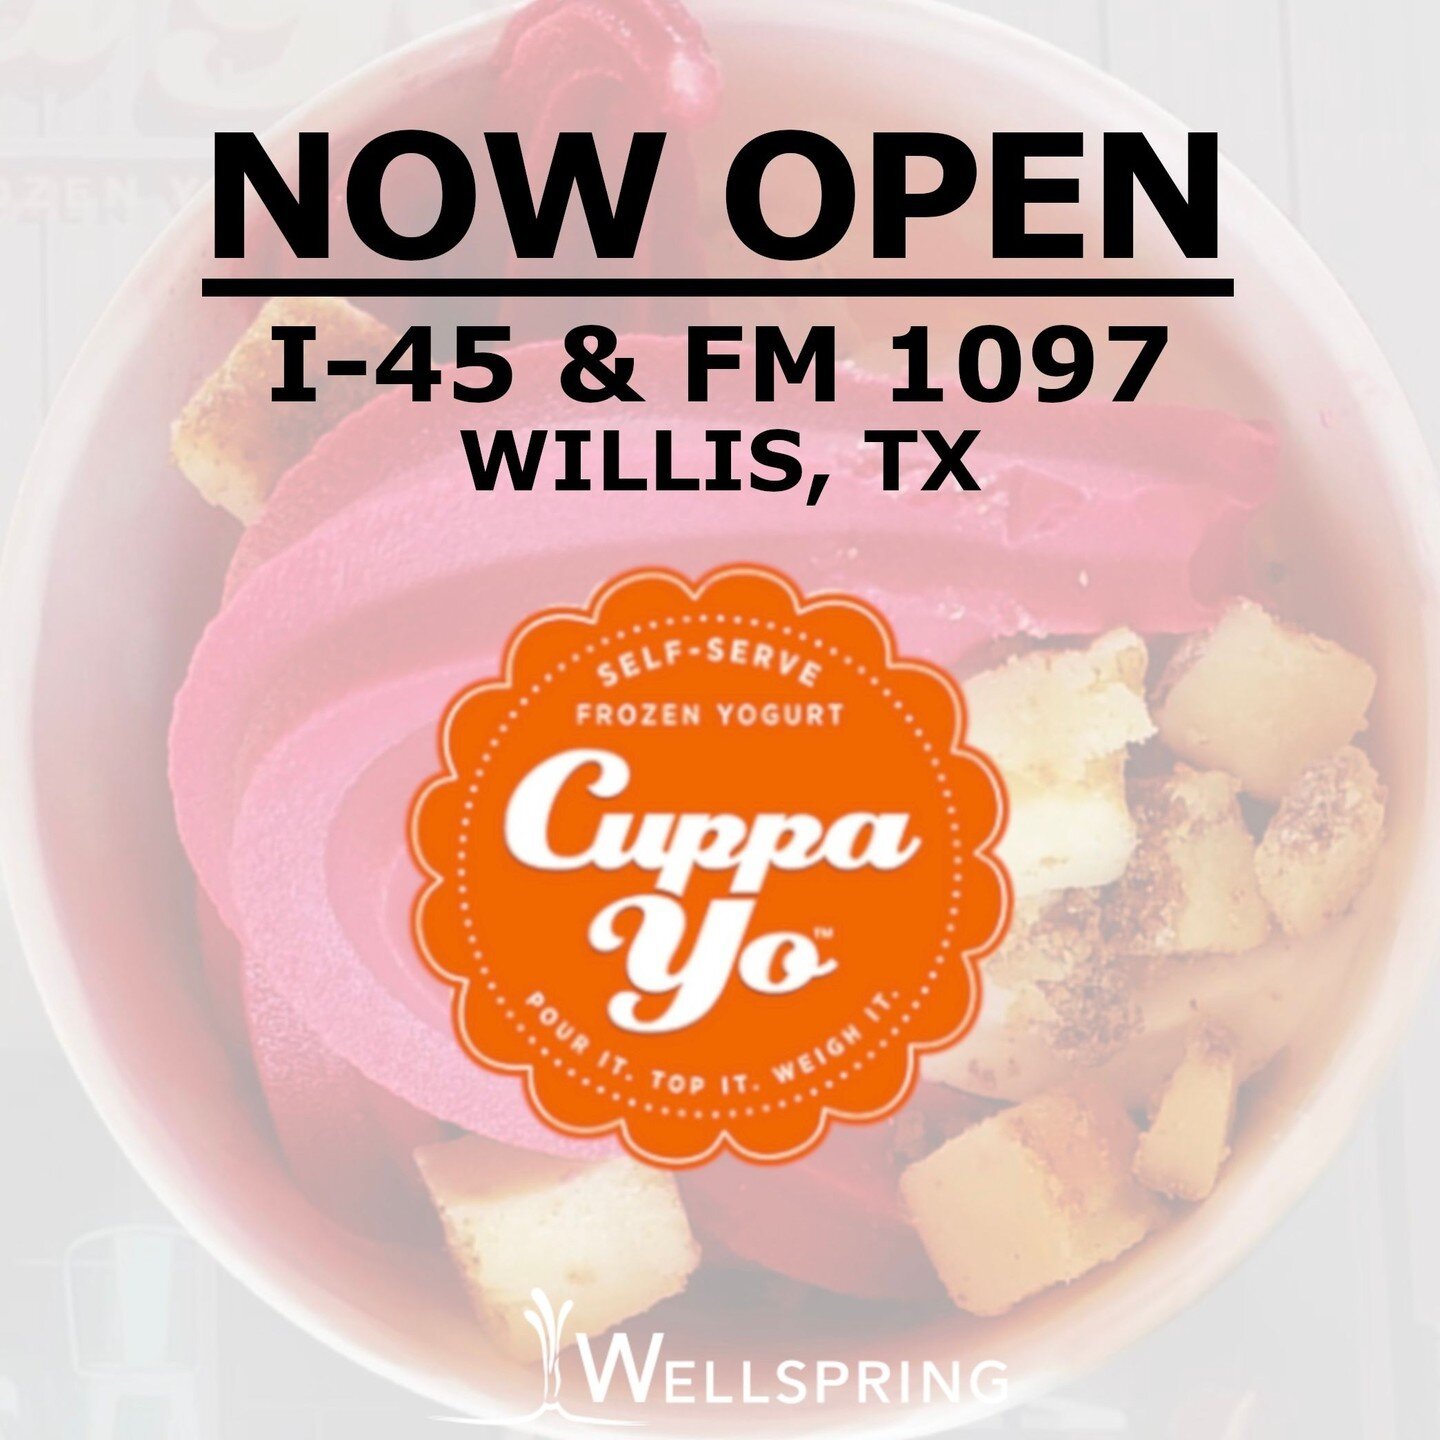 We all crave dessert, so why not make it healthy? Cuppa Yo is open in Willis, TX!

#wellspringcre #cre #retail #tenantrep #cuppayo #yummy #froyo #nowopen